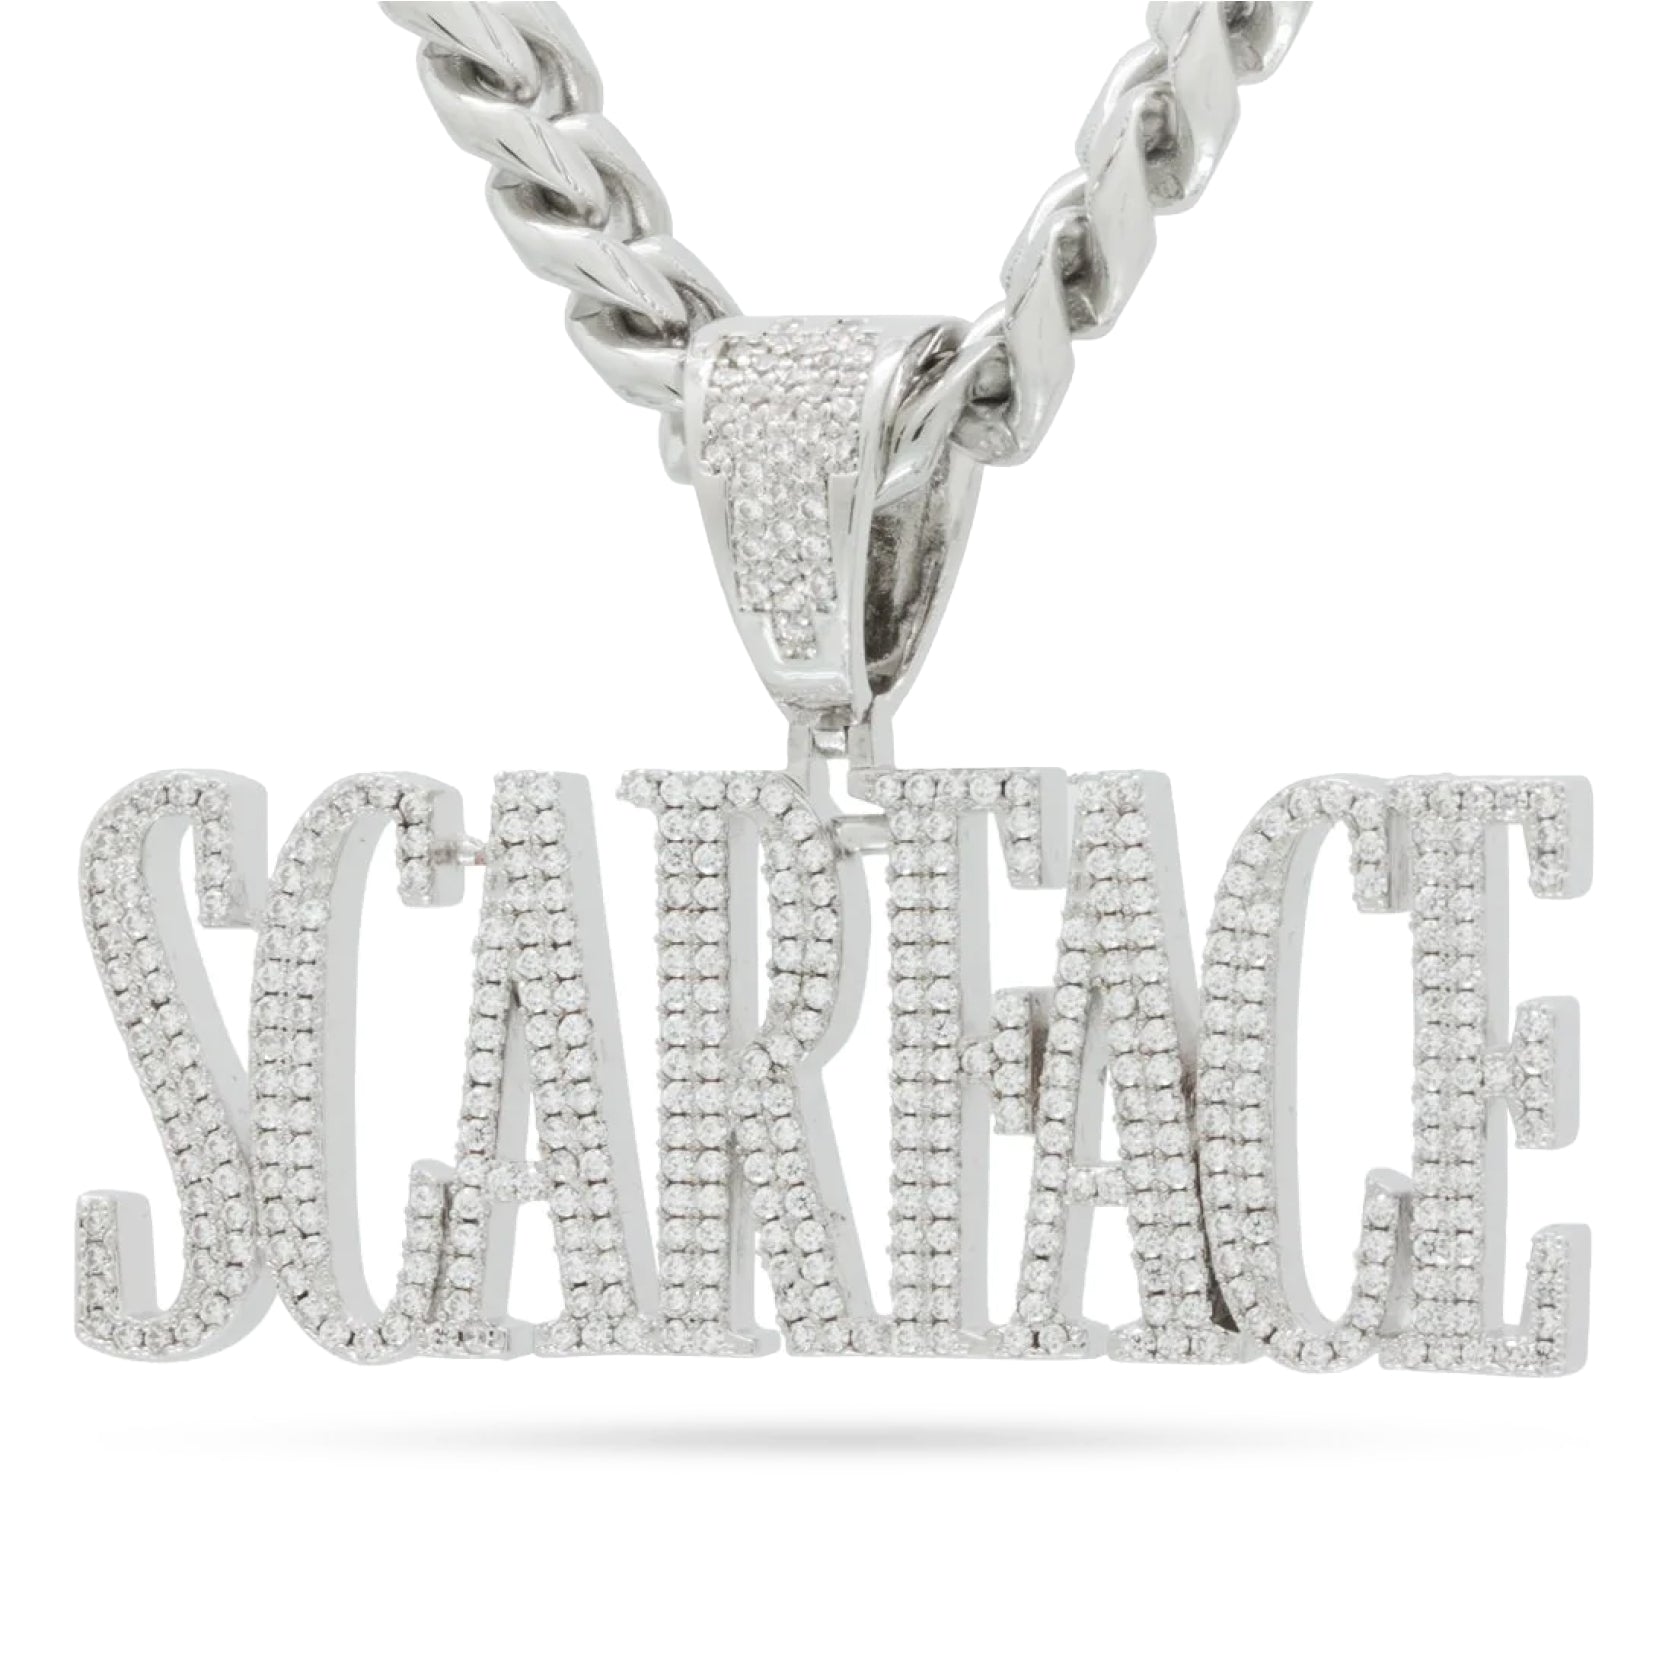 KING ICE SCARFACE NECKLACE - DENiMPiRE